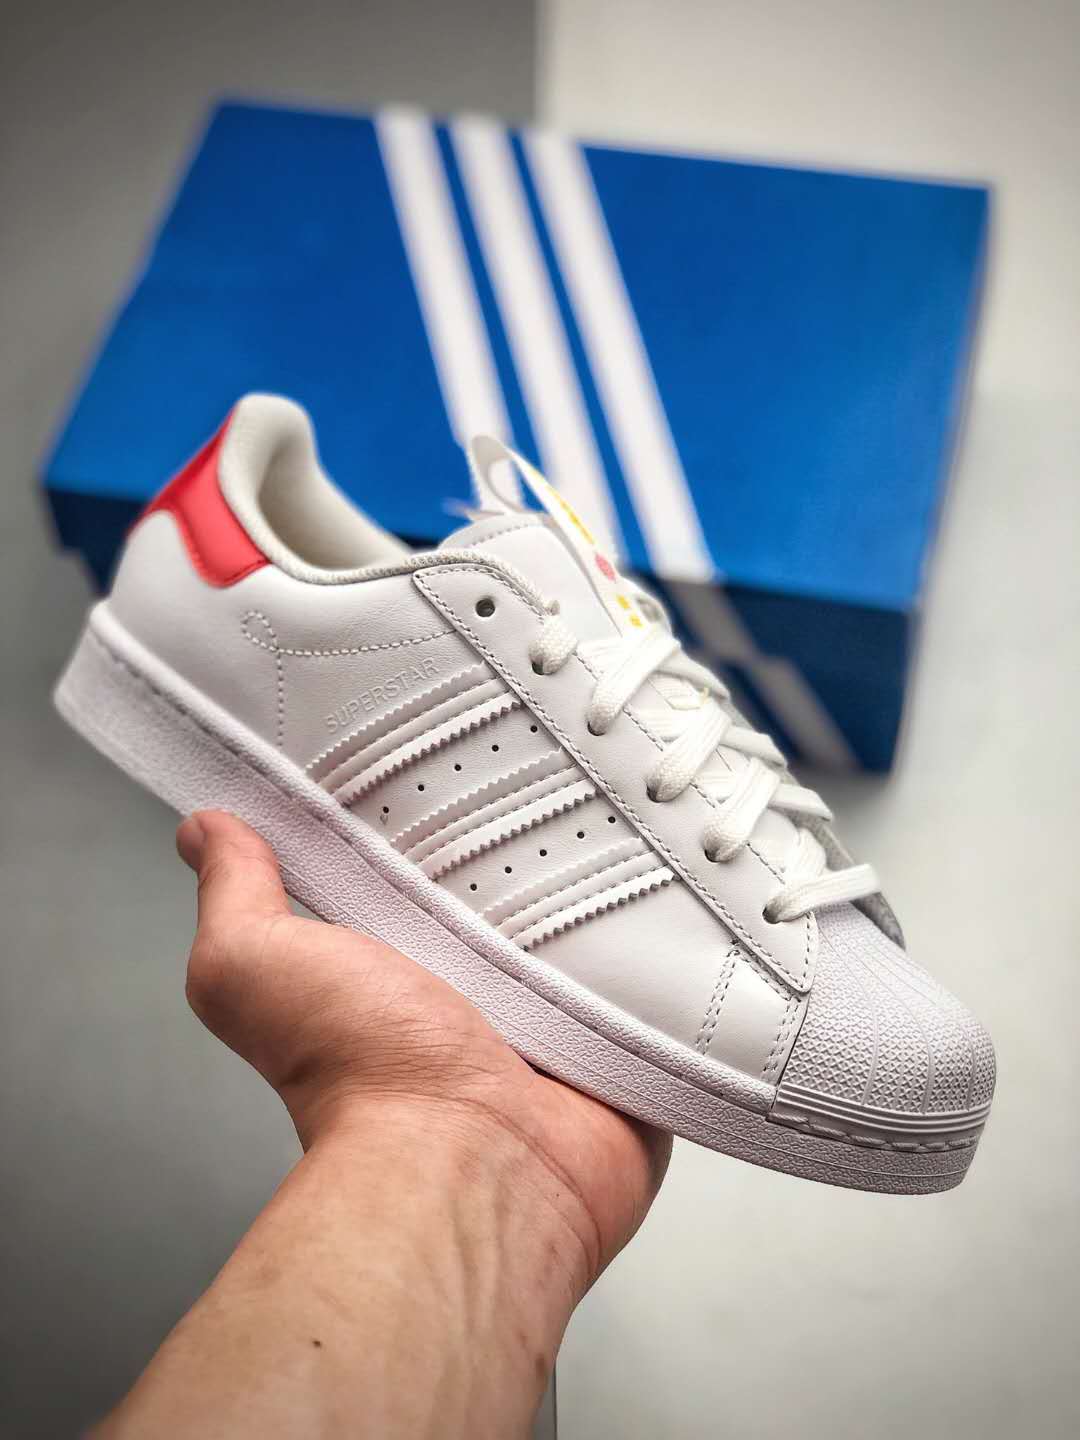 Adidas Superstar Beijing Retro Casual Skate Shoes - Unisex White/Red FW2854